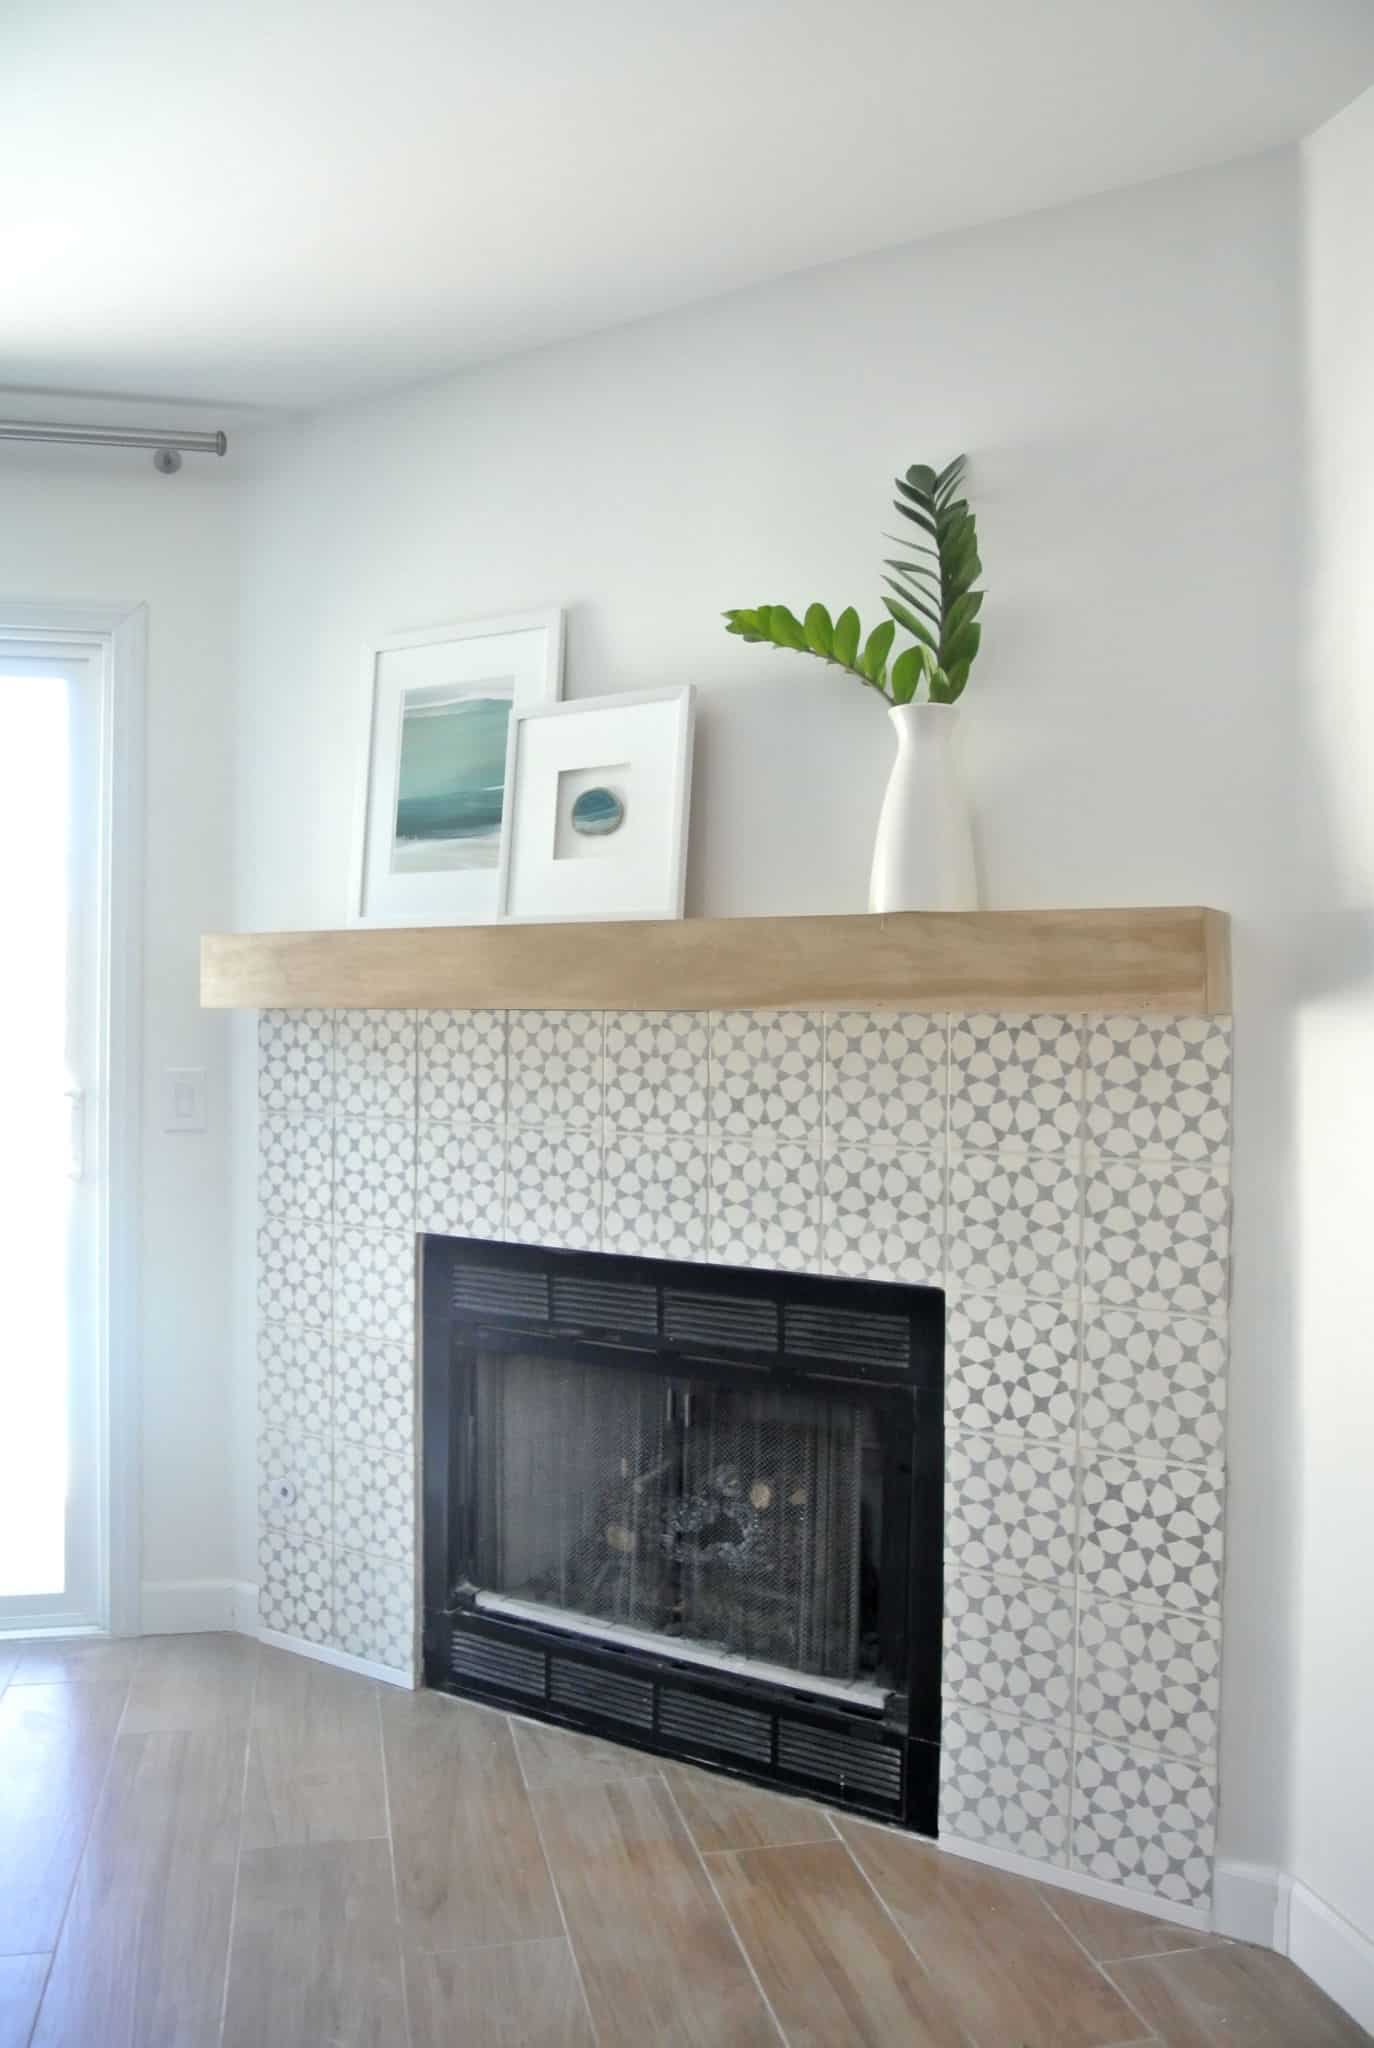 This corner fireplace makeover from Censtational Style is impressive, swapping out builder-grade tan tile for gorgeous grey and cream cement tile